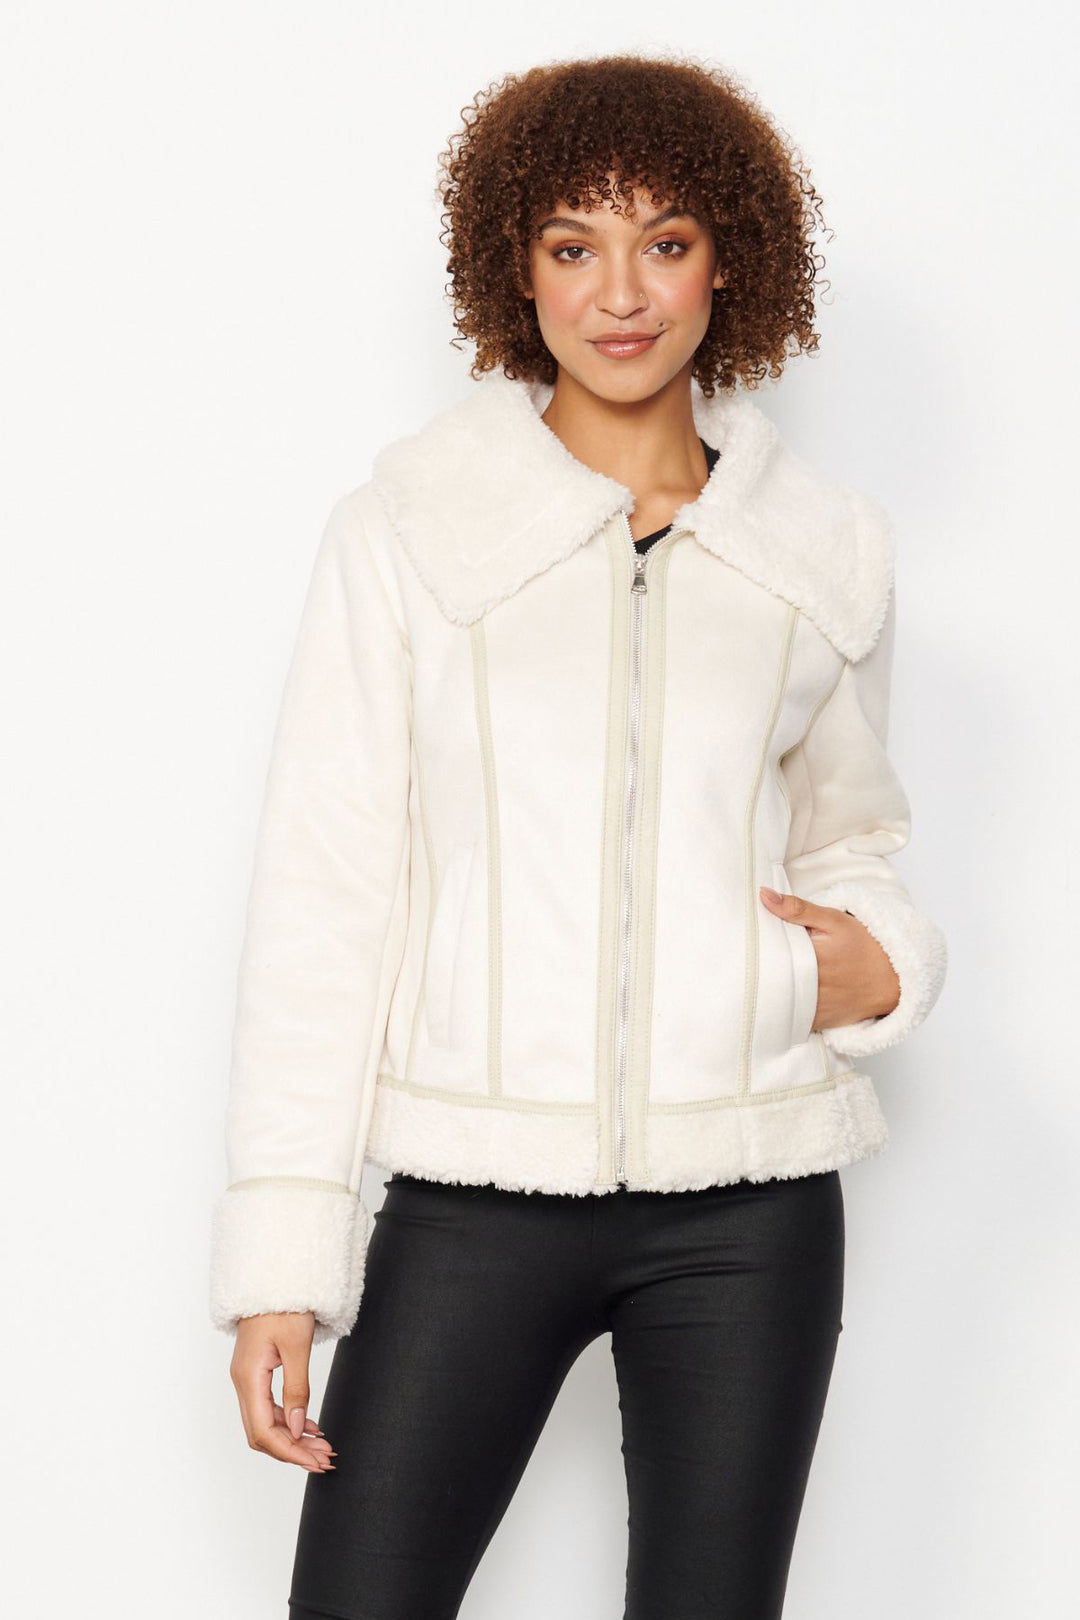 The Sherpa Jacket by CAJU is made for winter. This fitted jacket is wooly on the inside